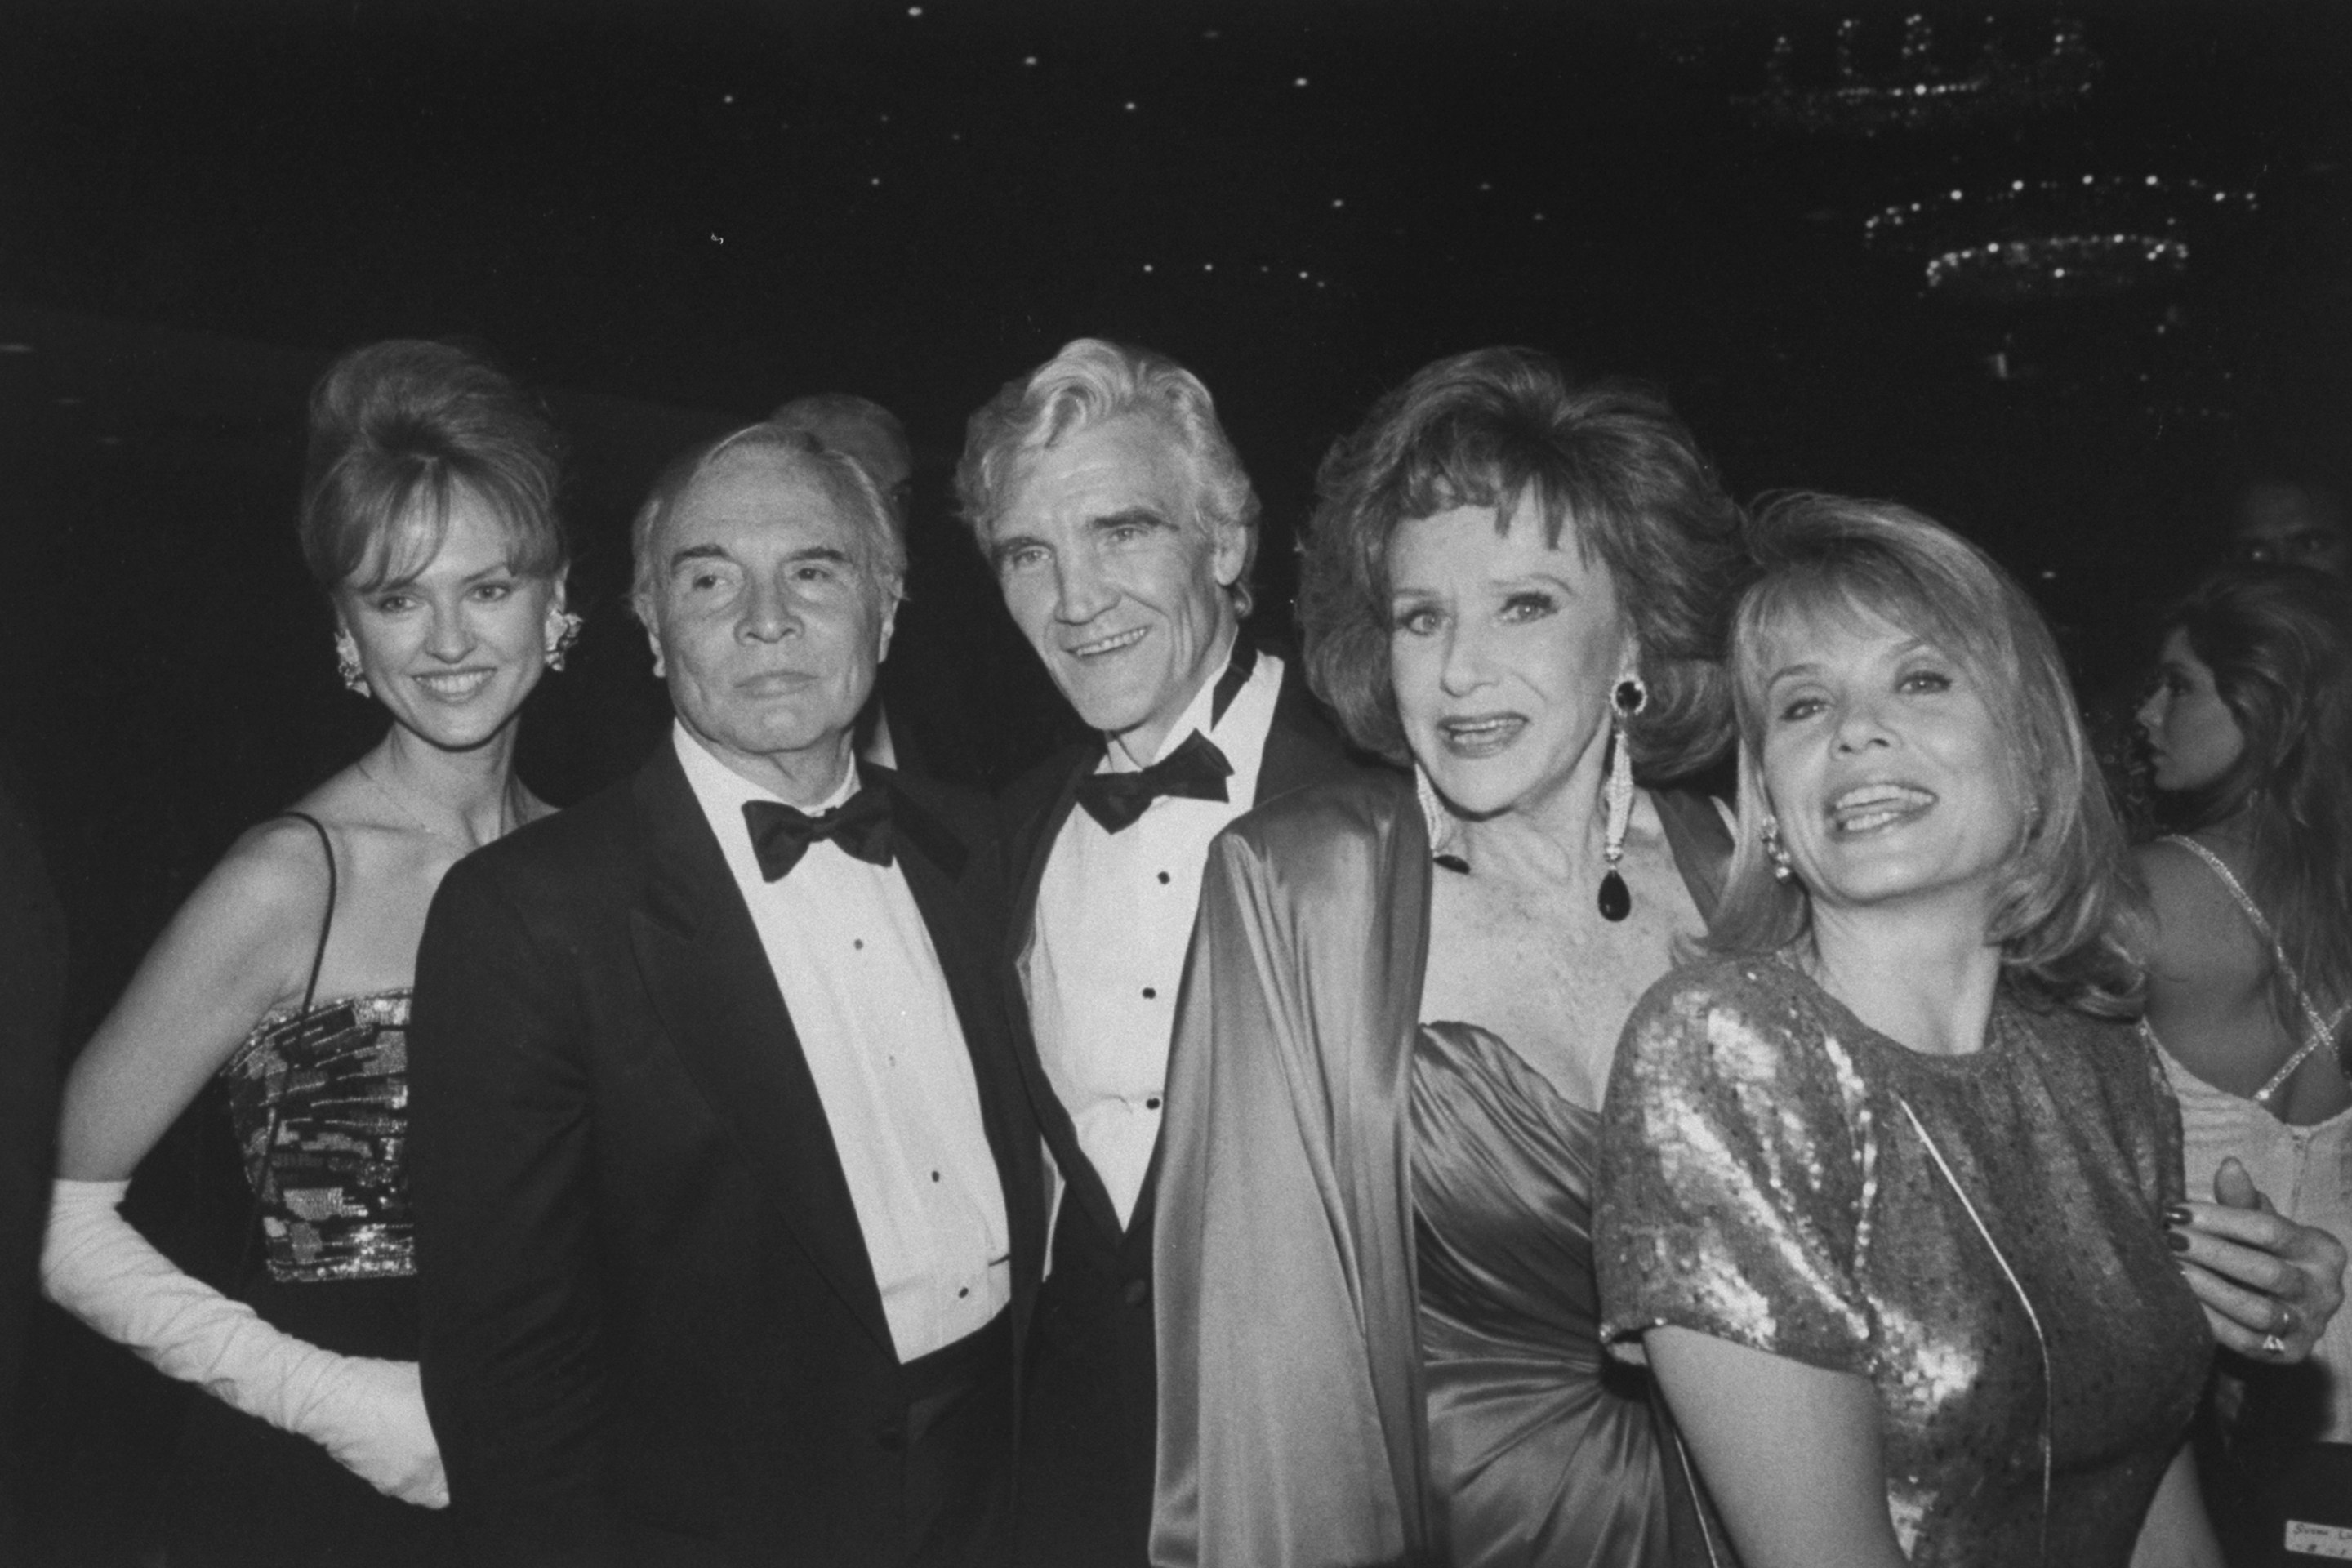 Actors from "All My Children" at the Emmys.